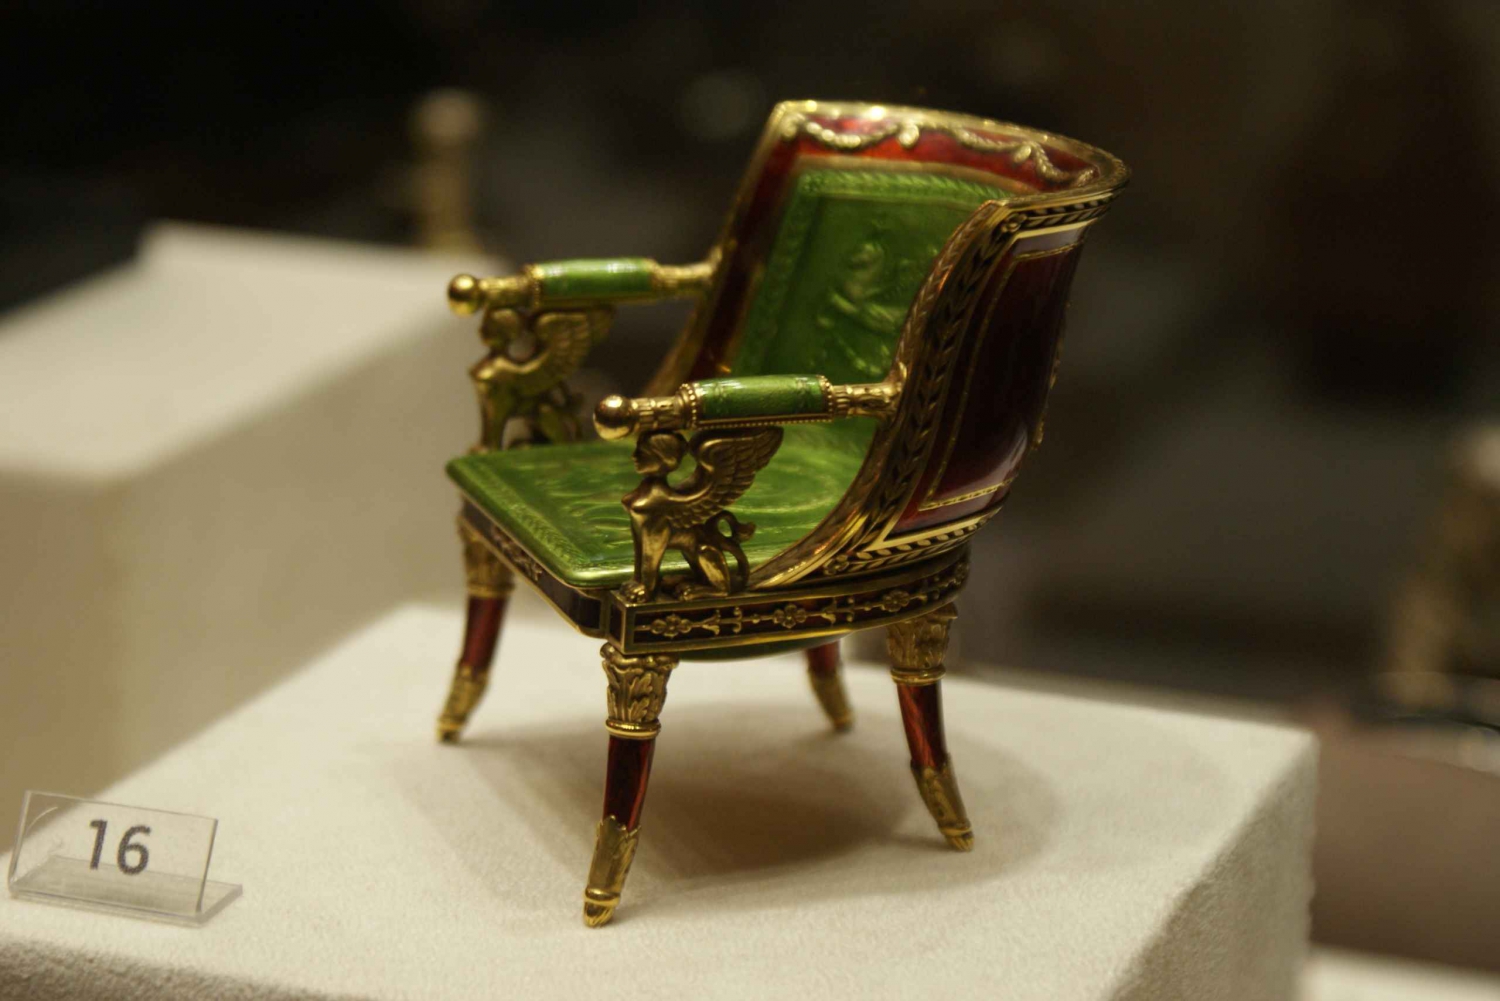 St. Petersburg: Faberge Museum Skip-the-Line Private Tour